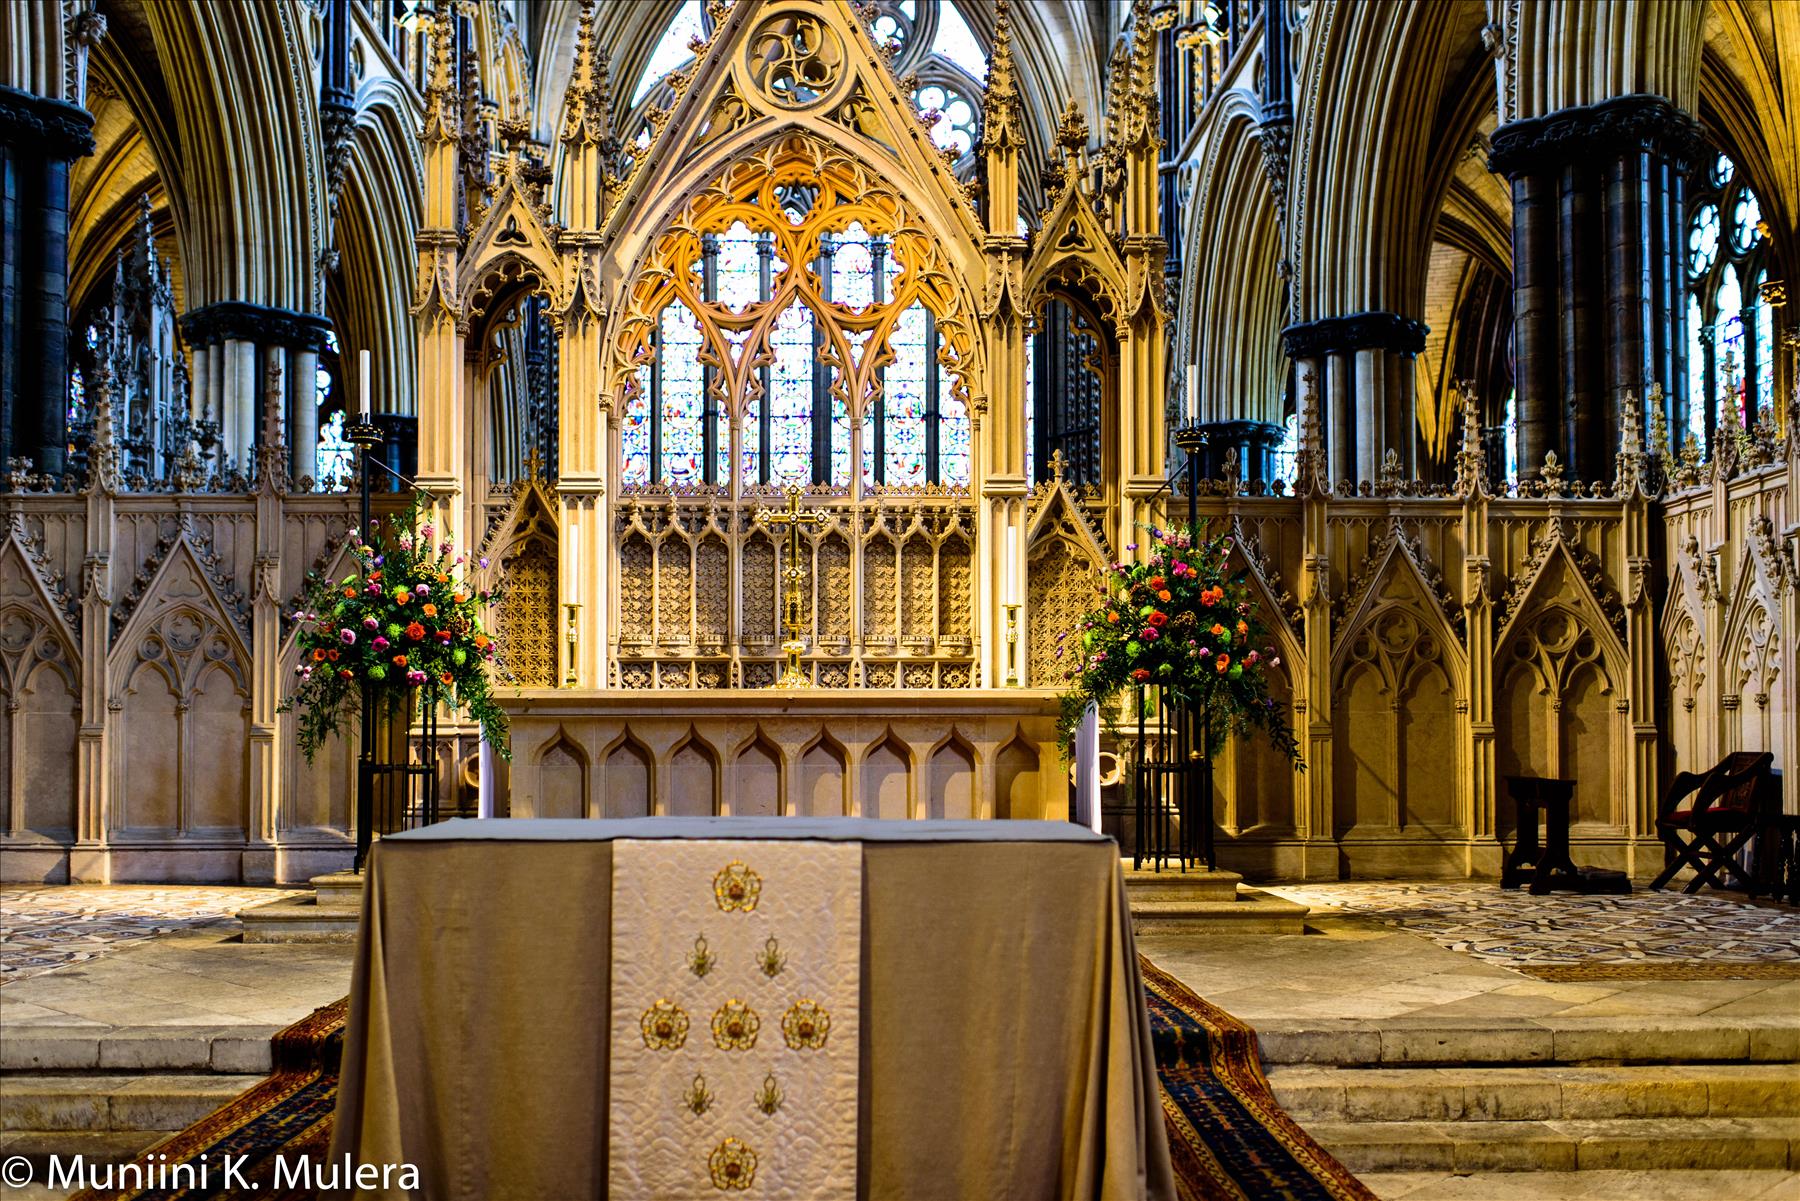 Memories of an afternoon at the Lincoln Cathedral, England